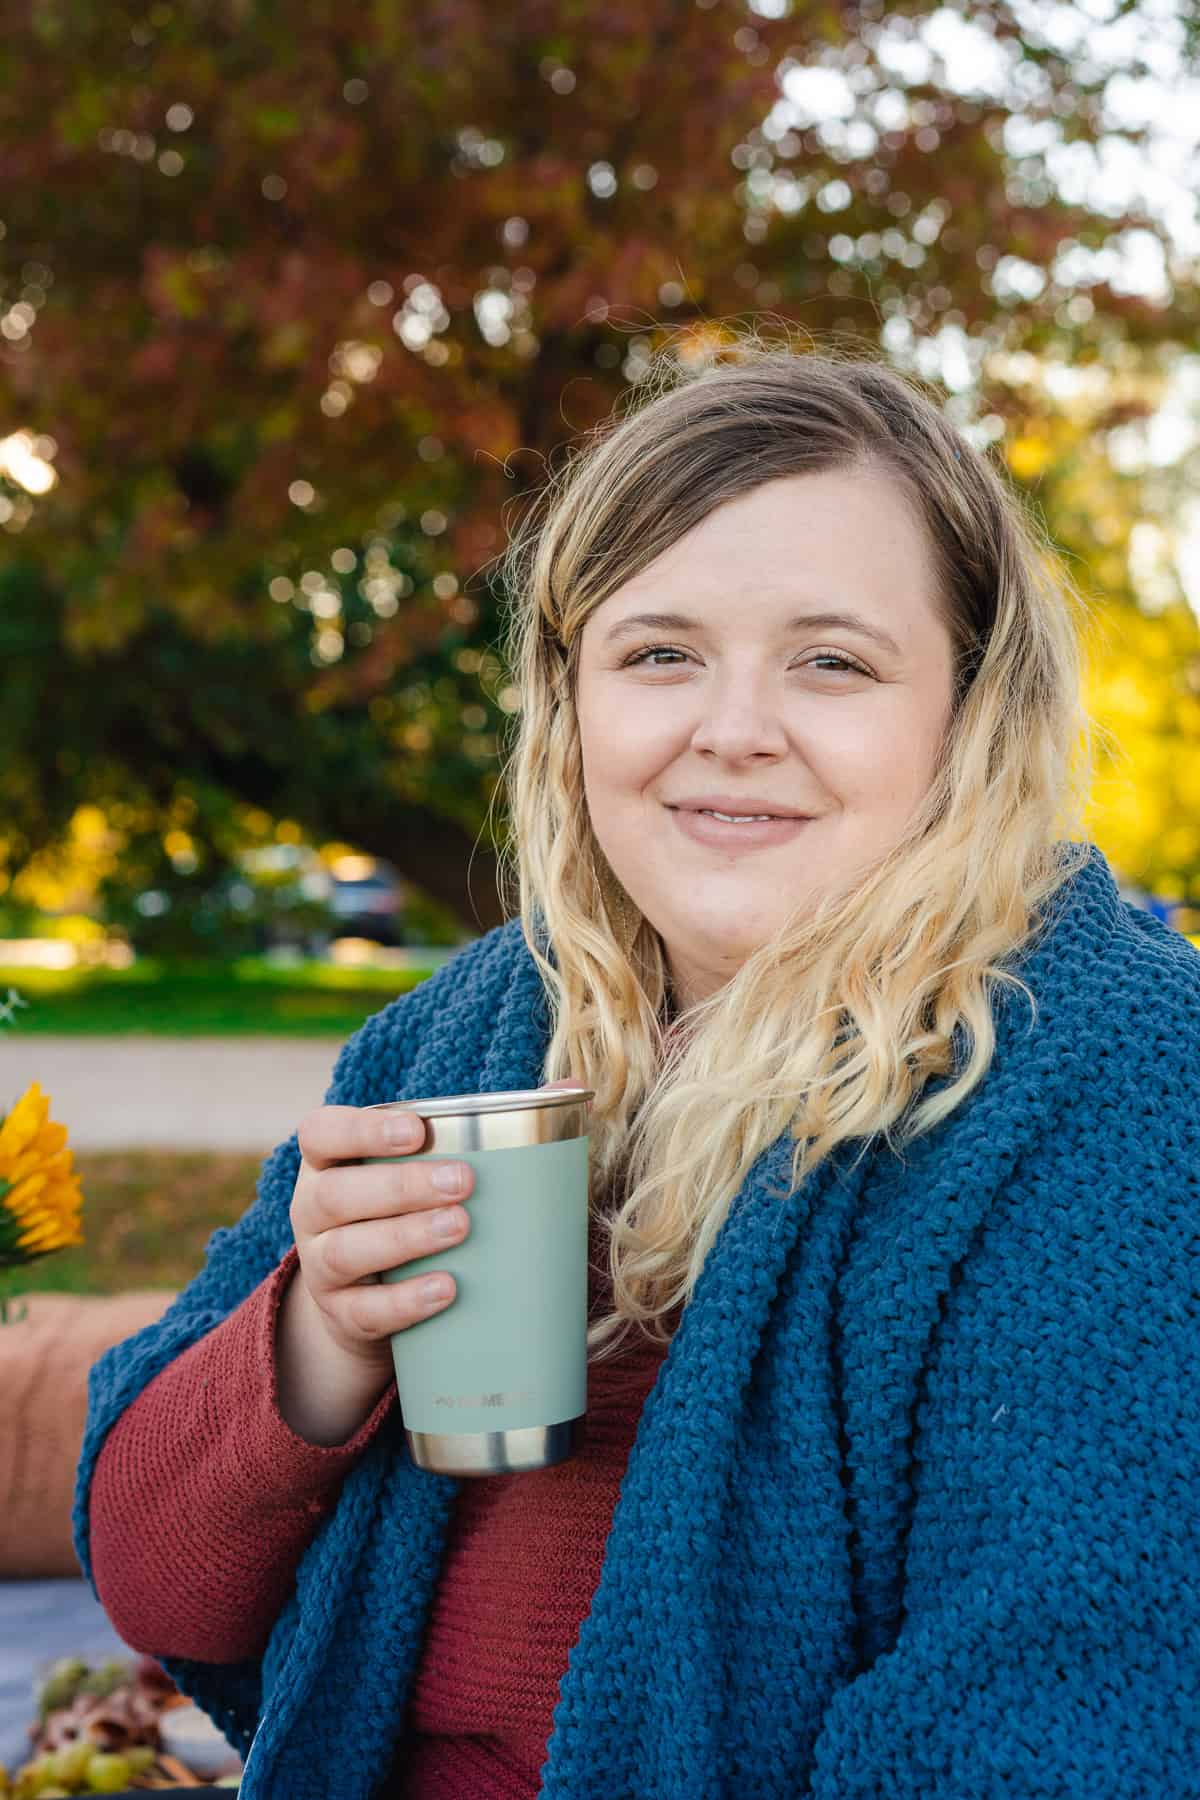 women in a fall setting with a cozy sweater, a blanket wrapped around her, and a tumbler in hand sipping a warm drink